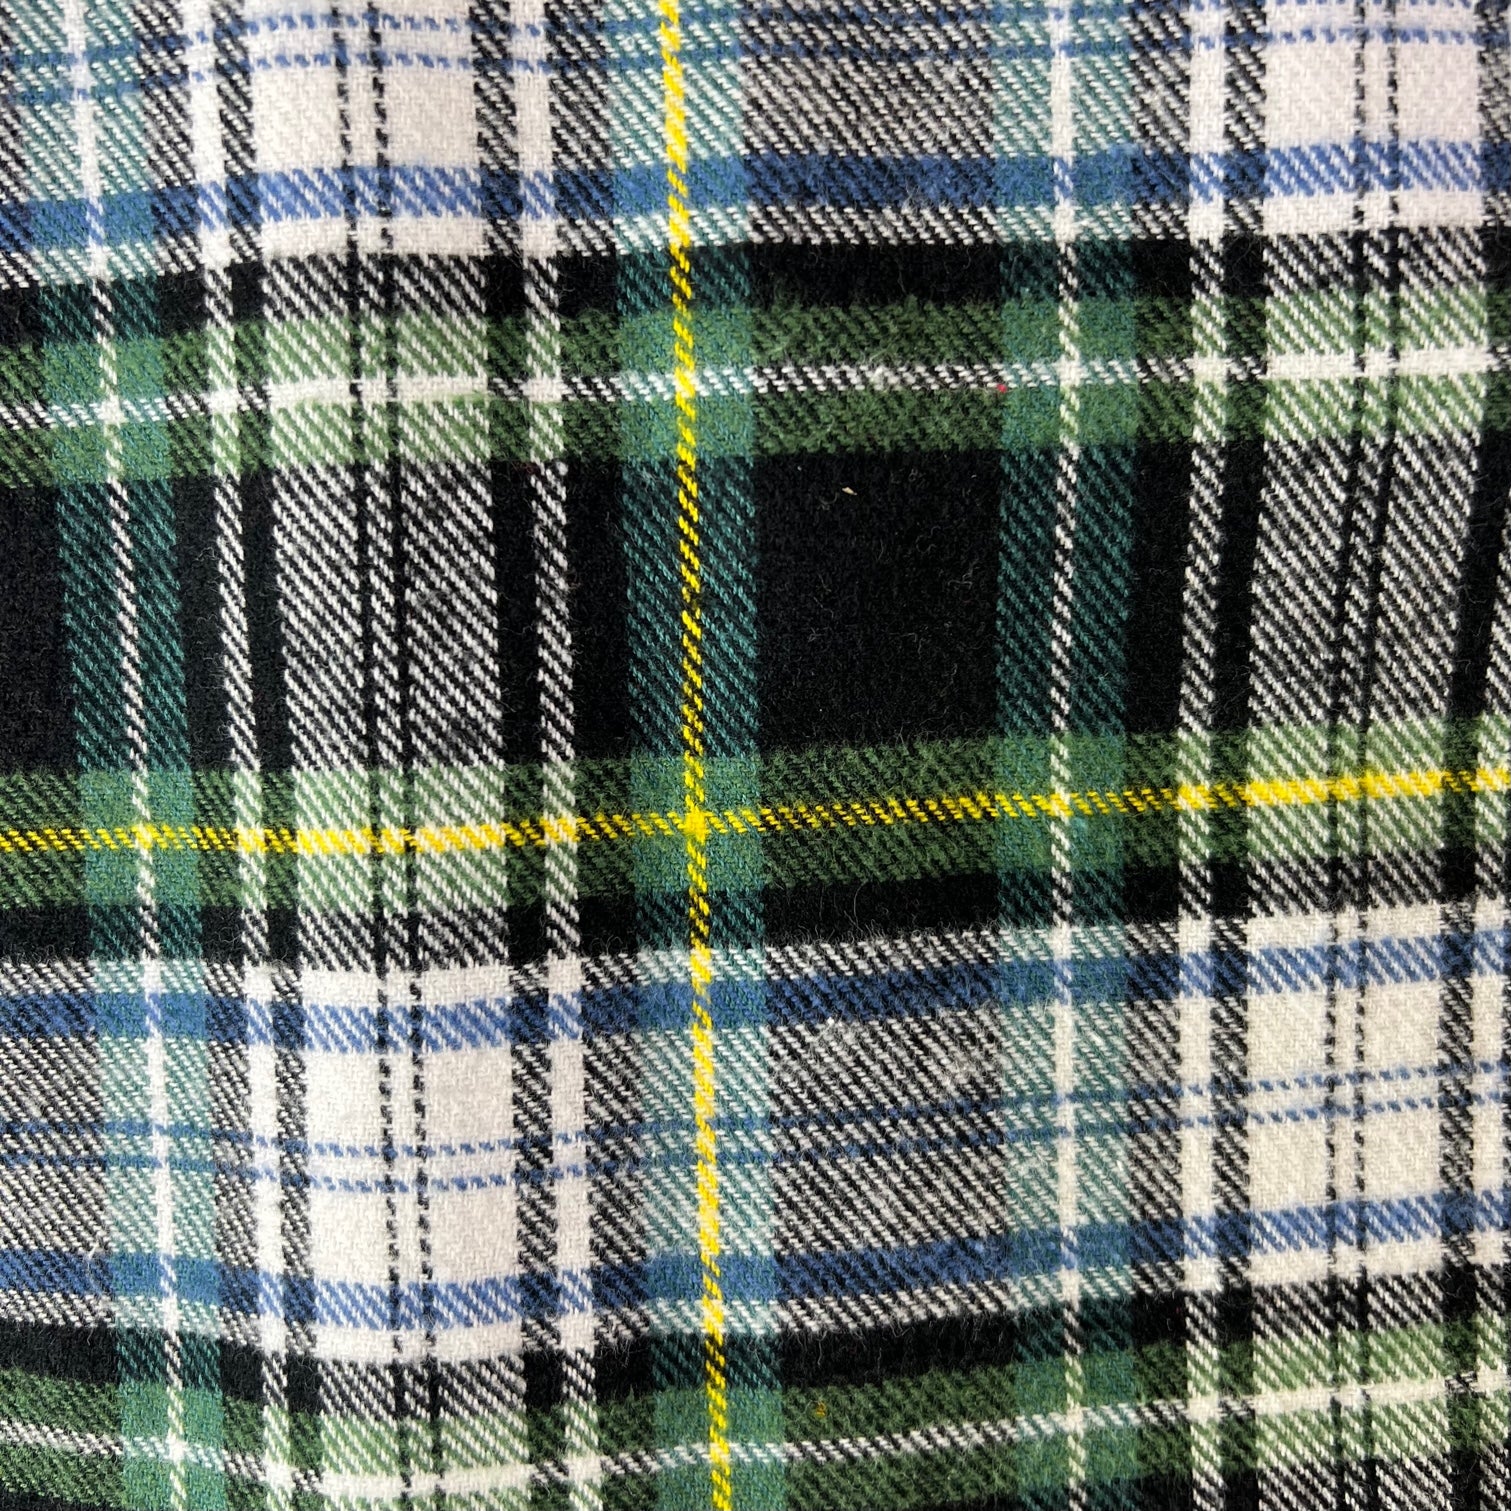 Evergreen, Black, White, Dusty Blue and Yellow Tartan Plaid Flannel Infinity or Blanket Scarf